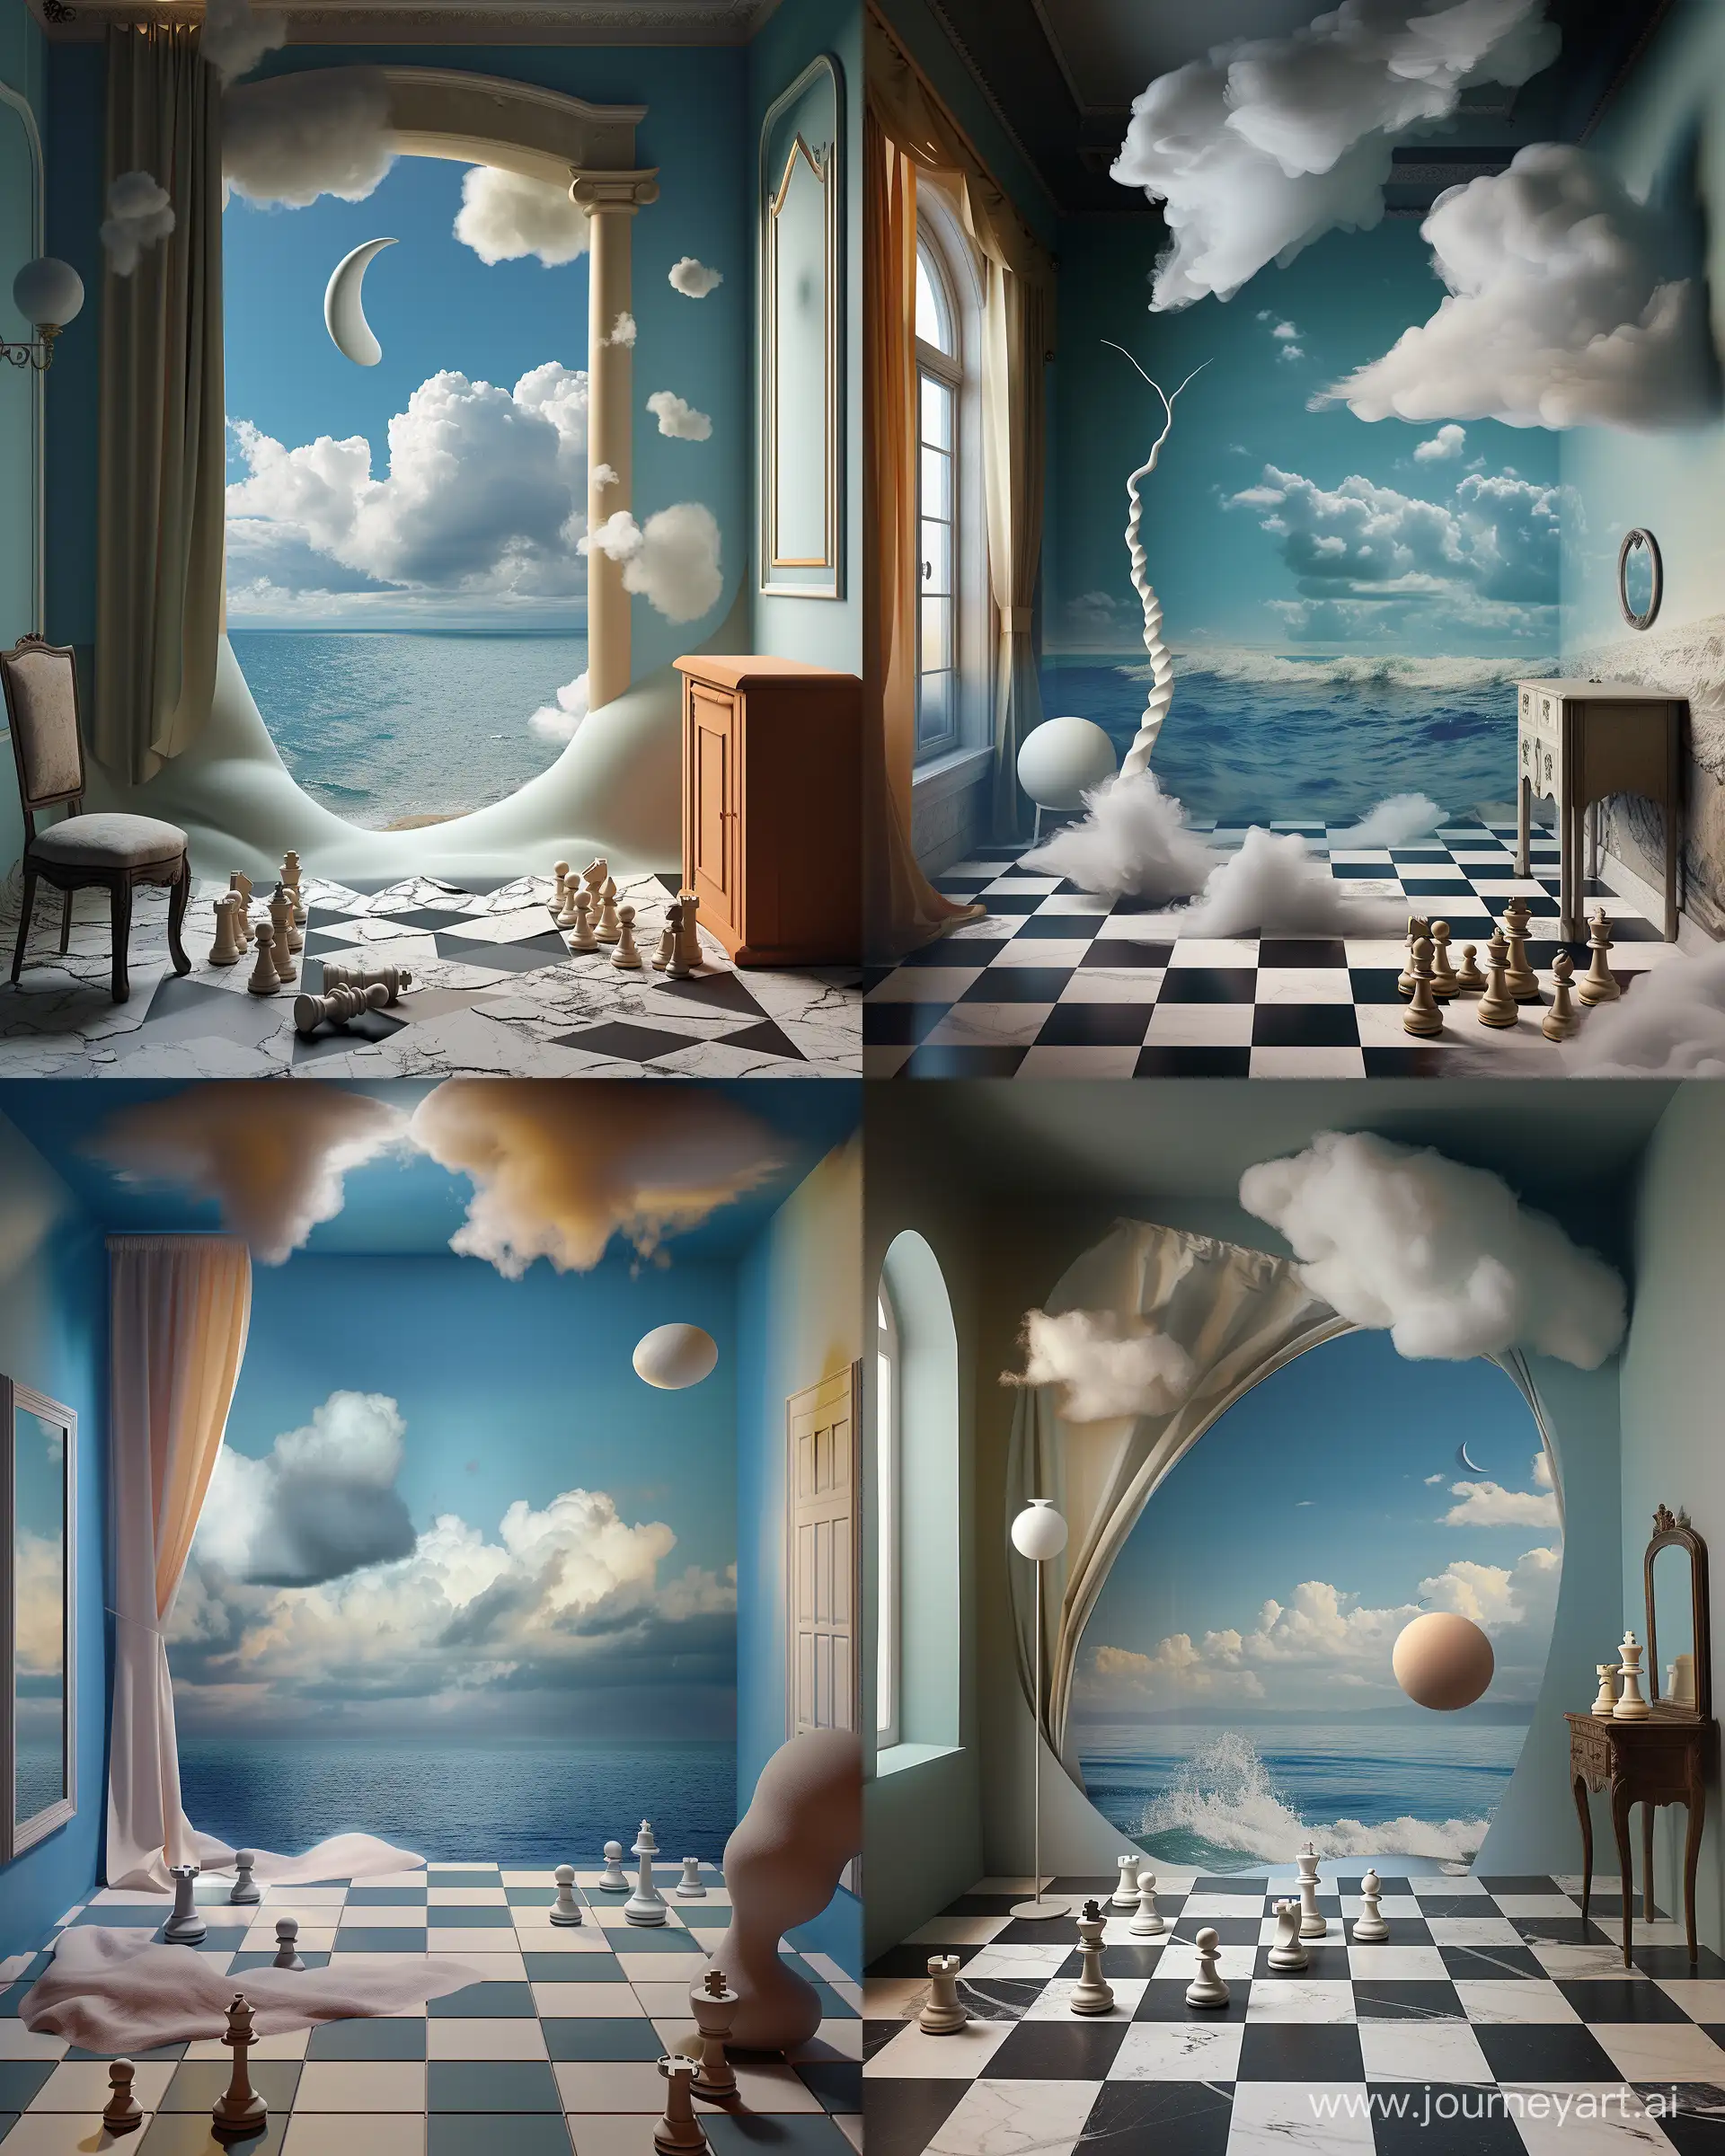 Abstract-Chessboard-Collision-of-Sea-and-Clouds-in-Room